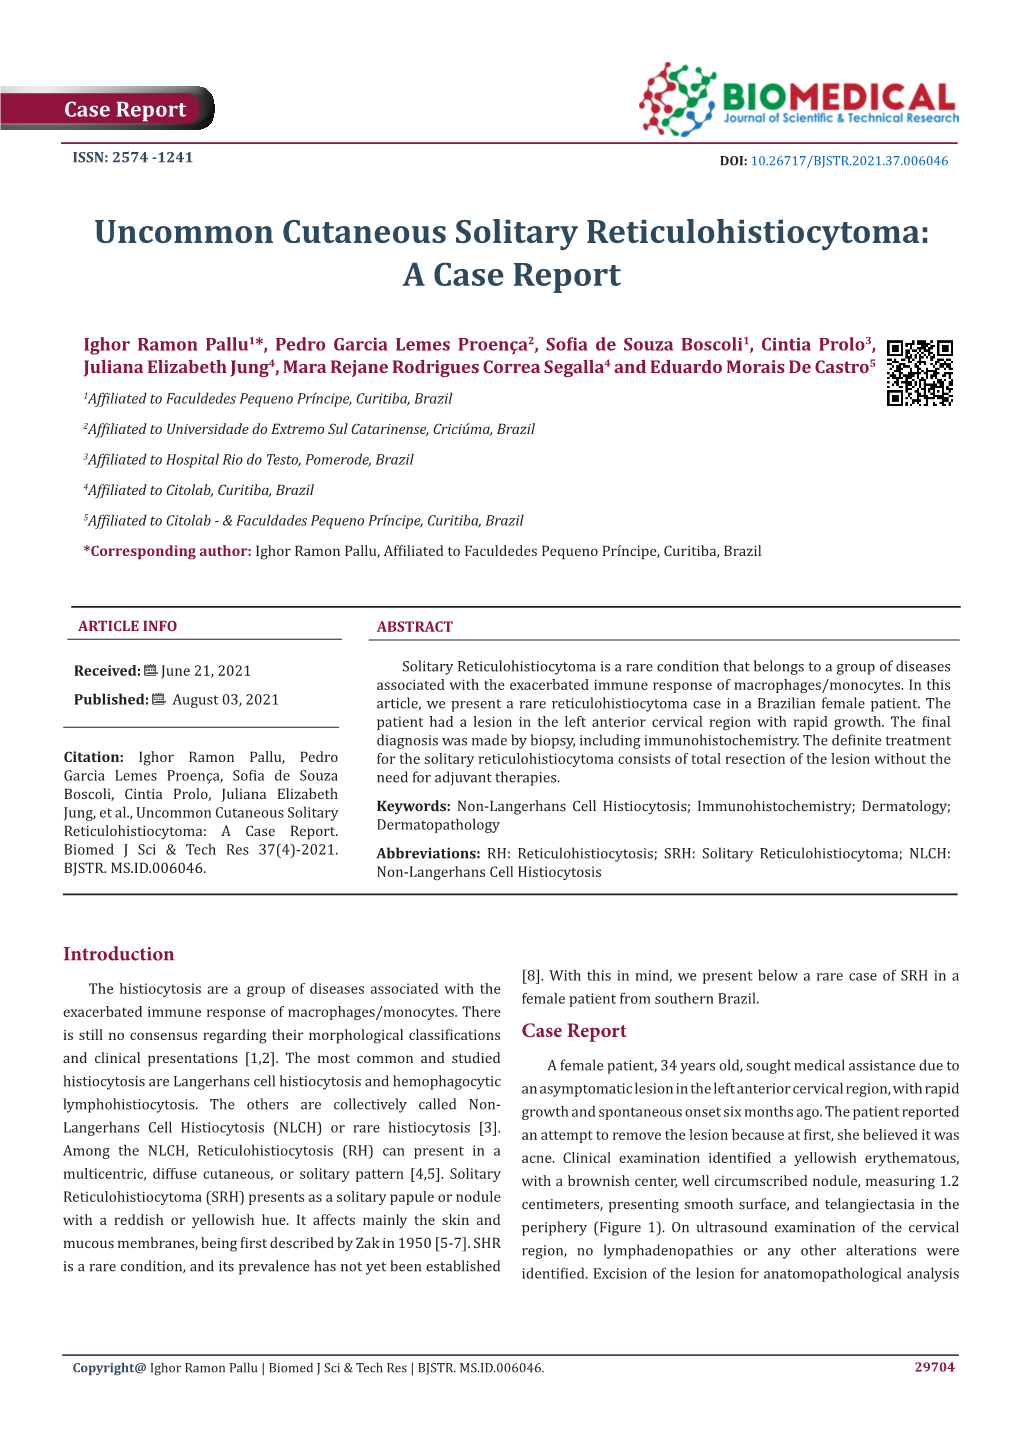 Uncommon Cutaneous Solitary Reticulohistiocytoma: a Case Report